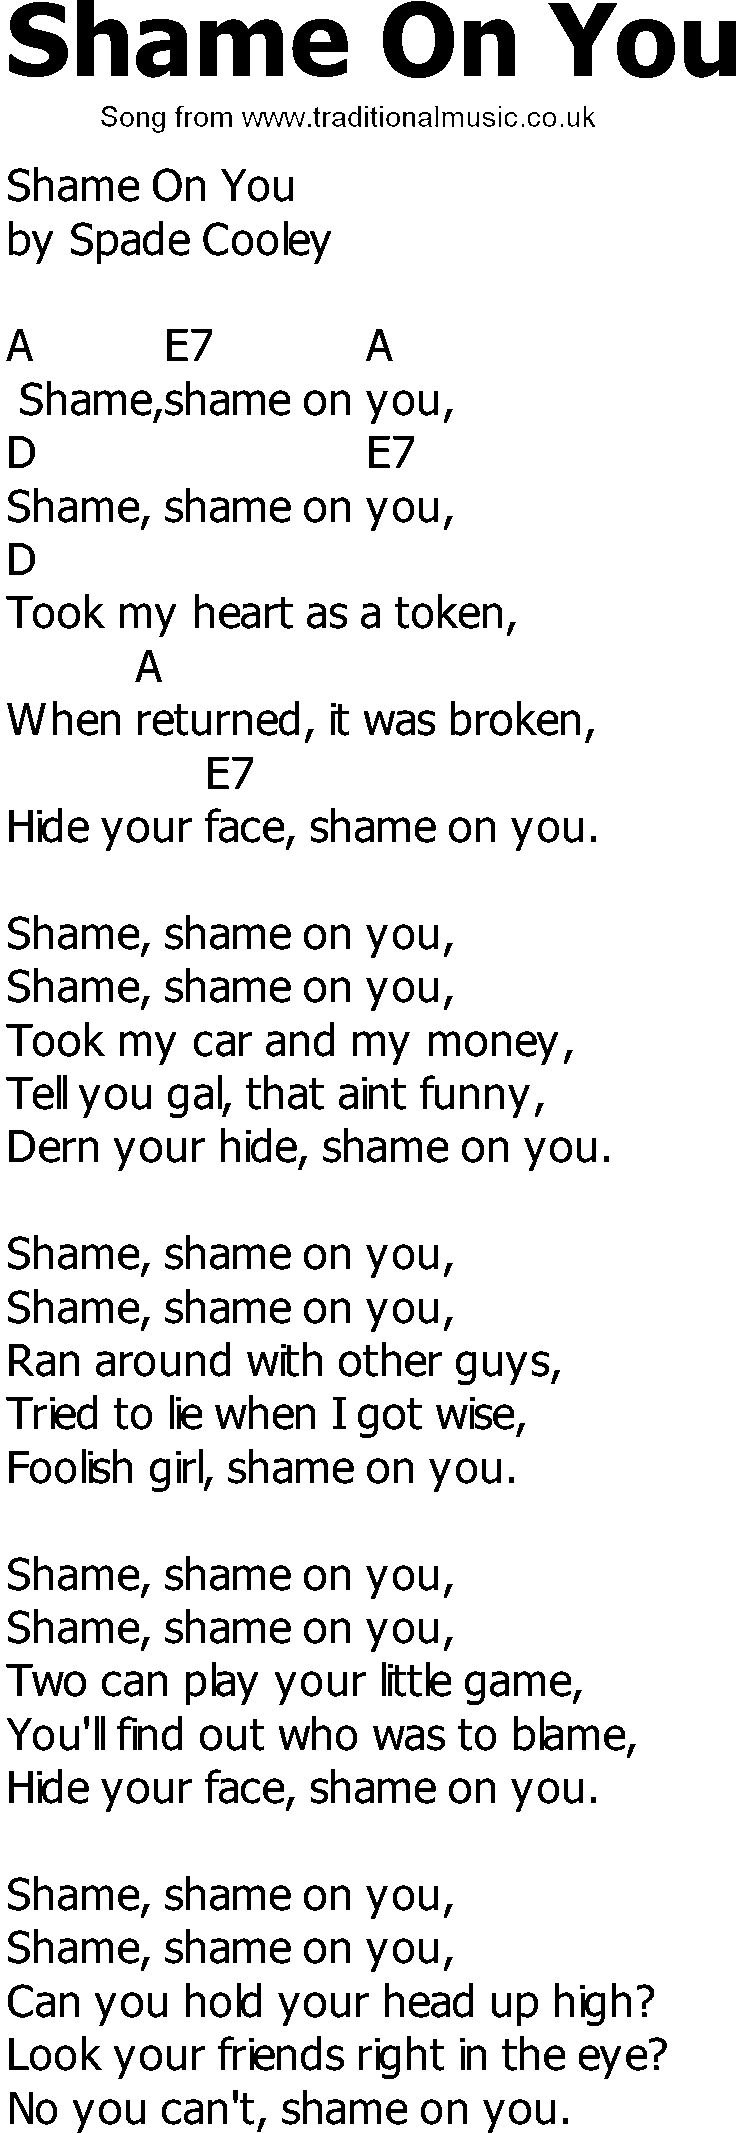 Old Country song lyrics with chords - Shame On You